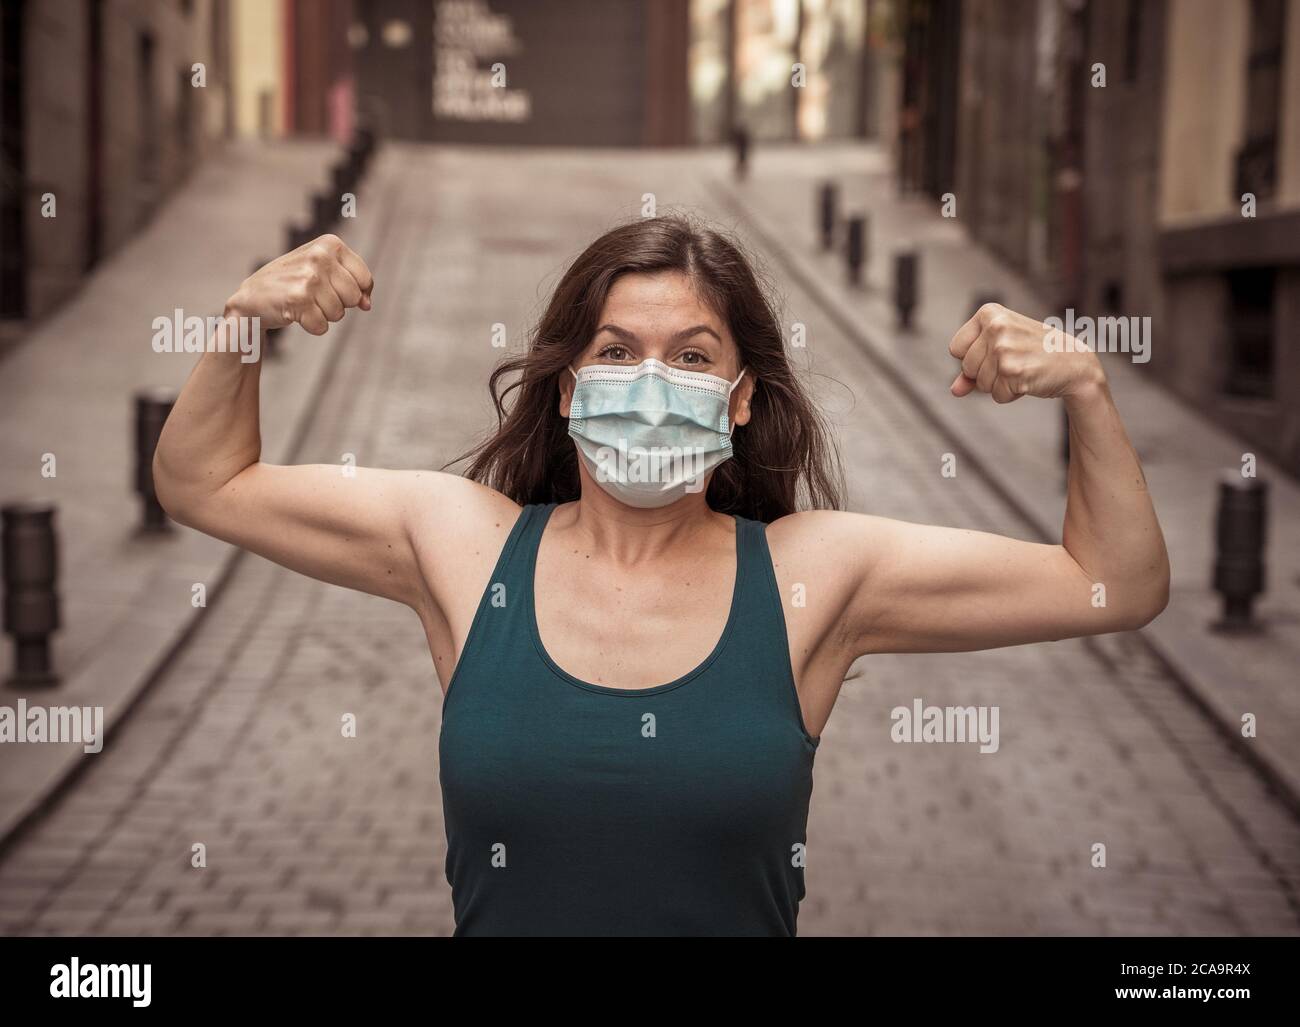 Young woman wearing surgical mask on face in public spaces. Coronavirus spreading protection mask protective against influenza viruses and diseases. P Stock Photo